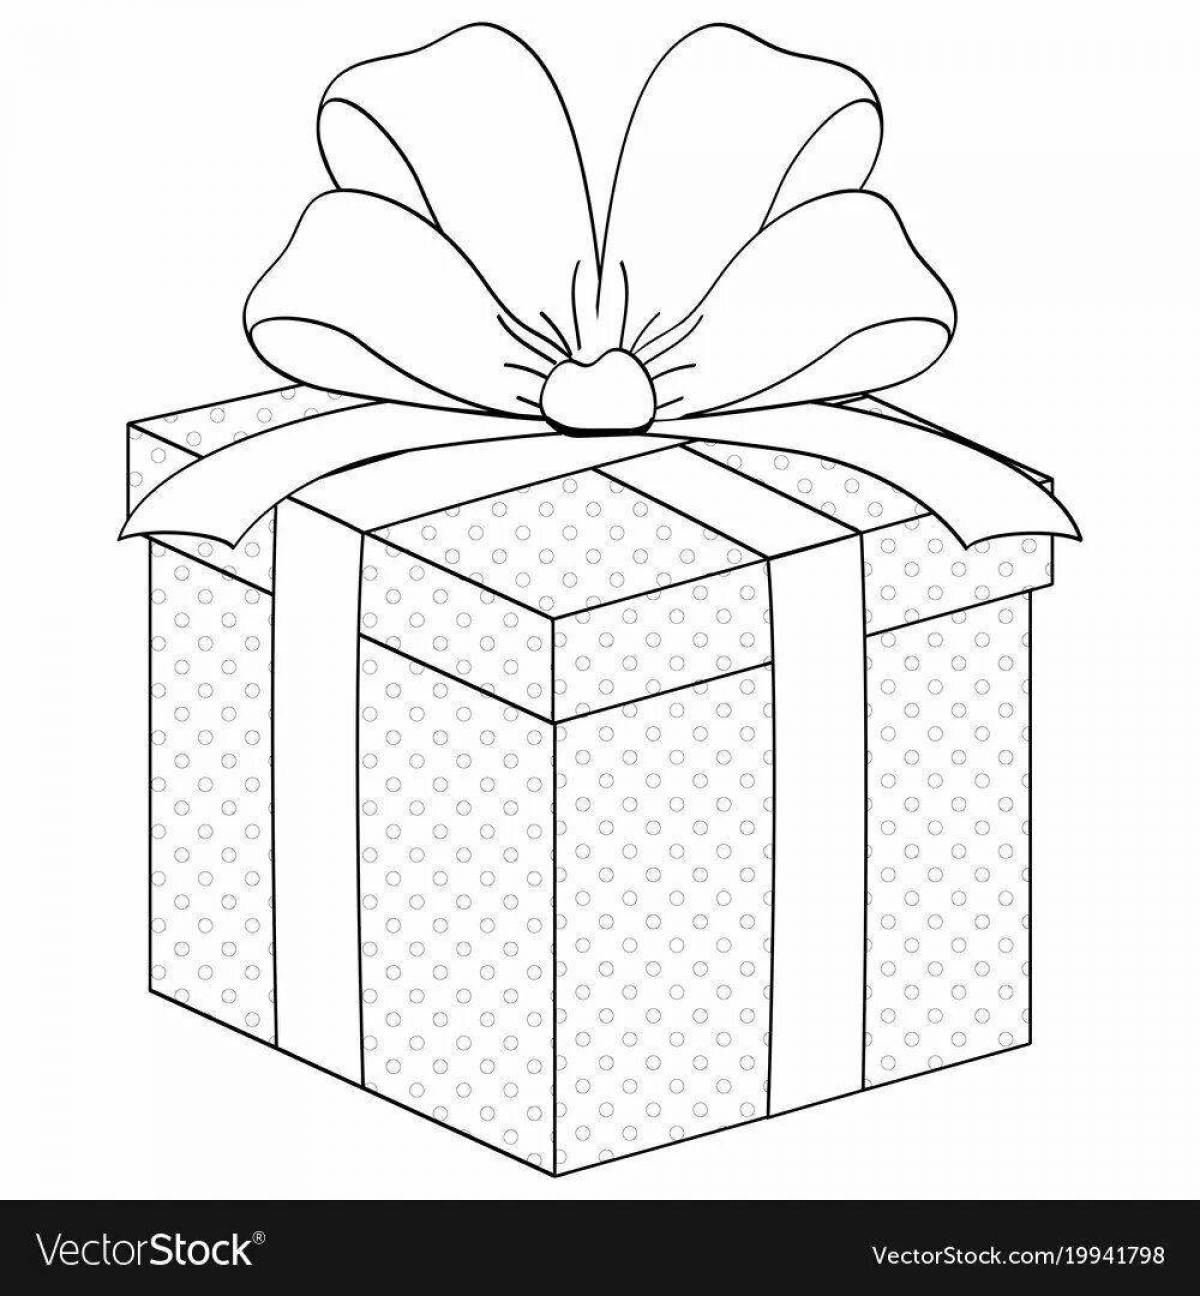 Wonderful great gift coloring book